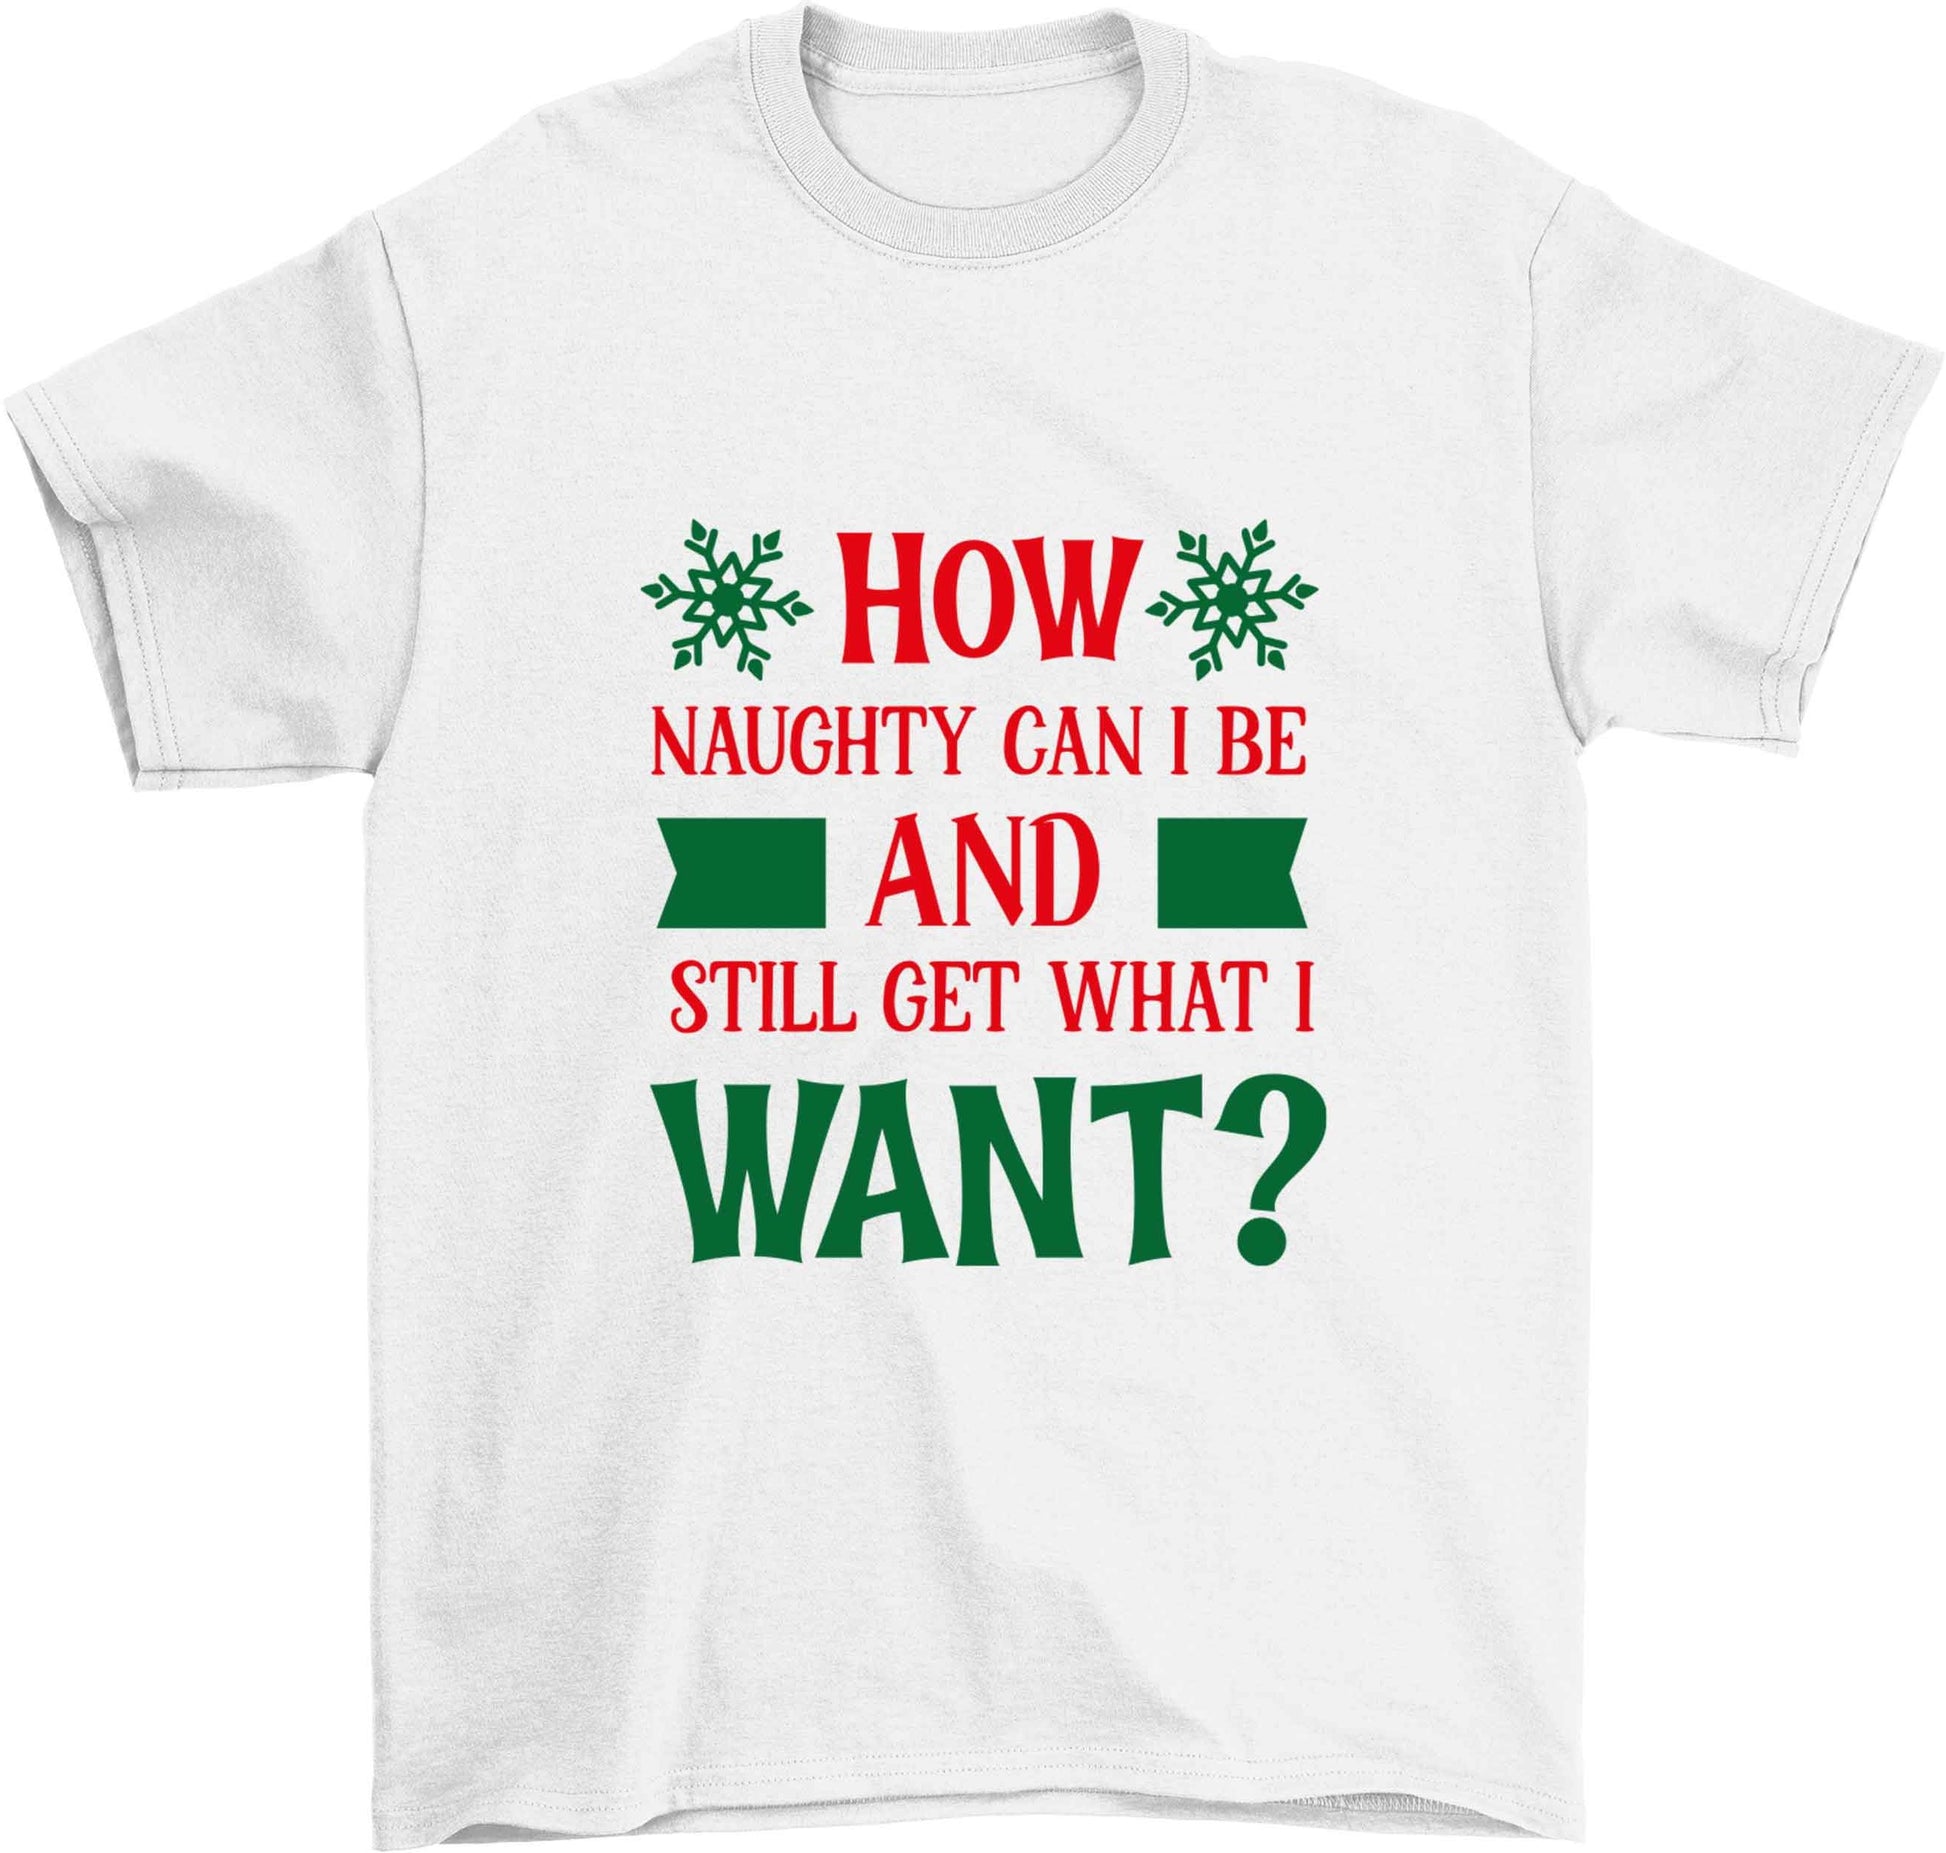 How naughty can I be and still get what I want? Children's white Tshirt 12-13 Years